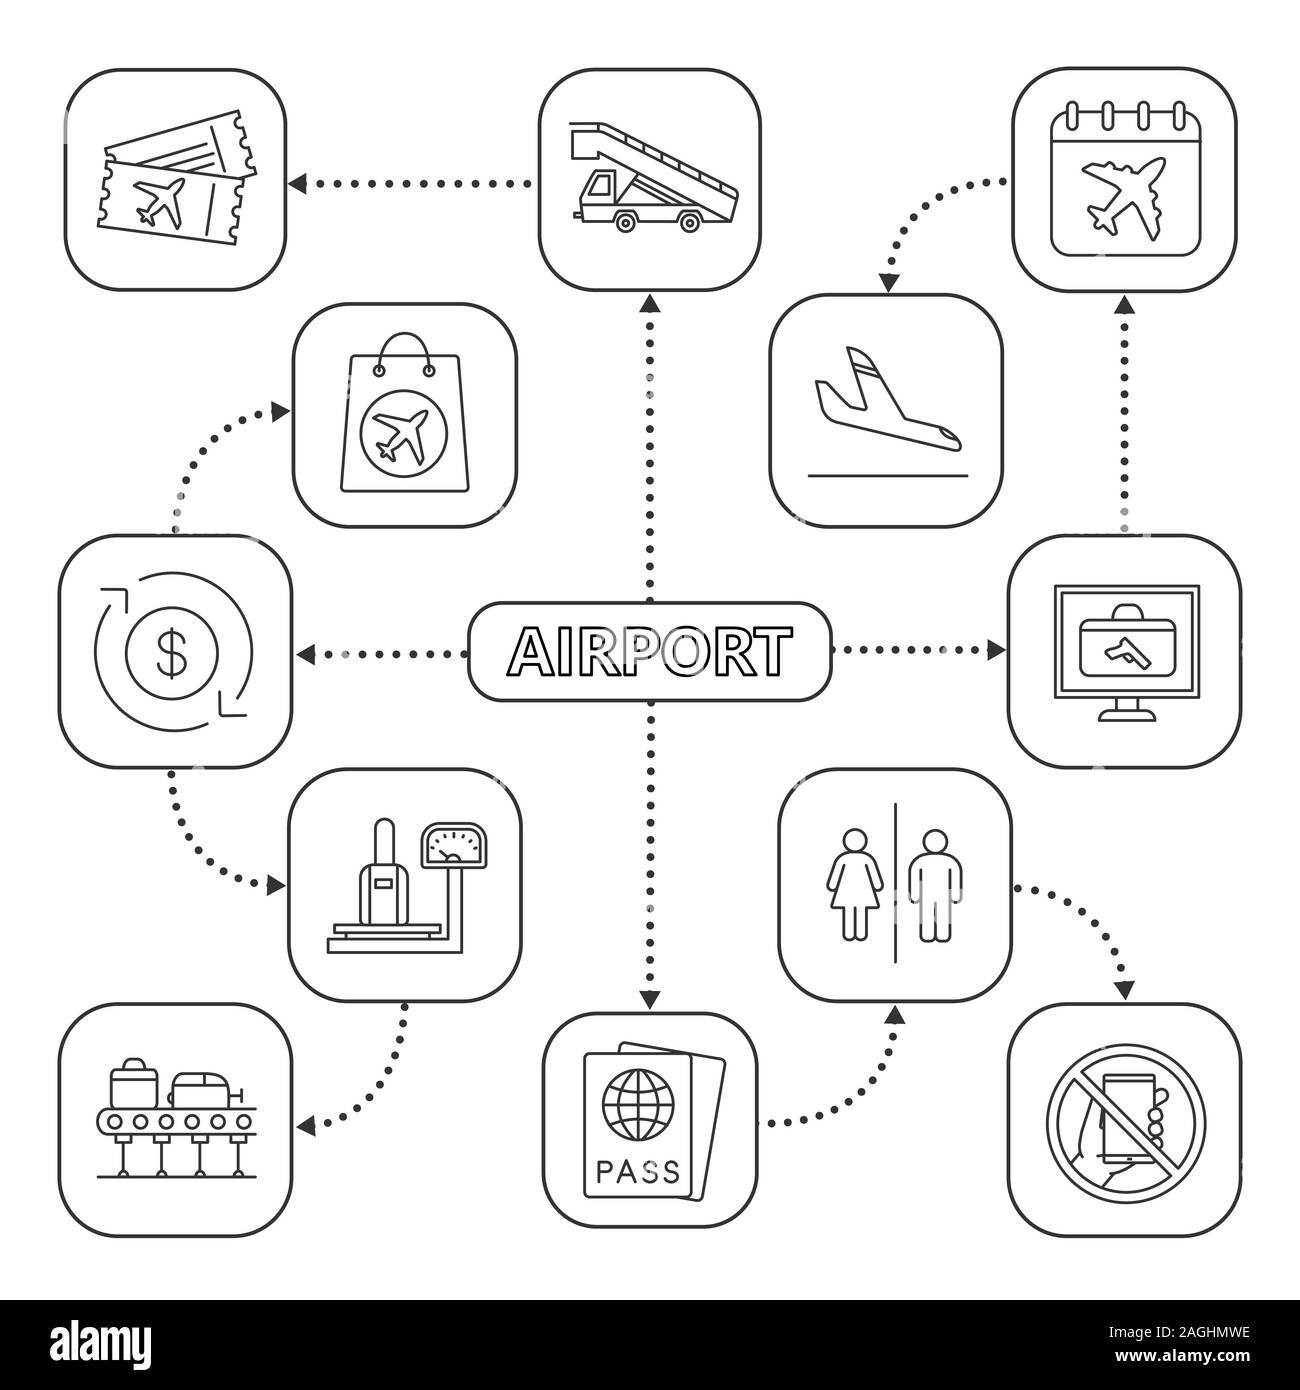 Airport service mind map with linear icons. Passport control, baggage check, tickets, wc, airport security. Concept scheme. Isolated vector illustrati Stock Vector